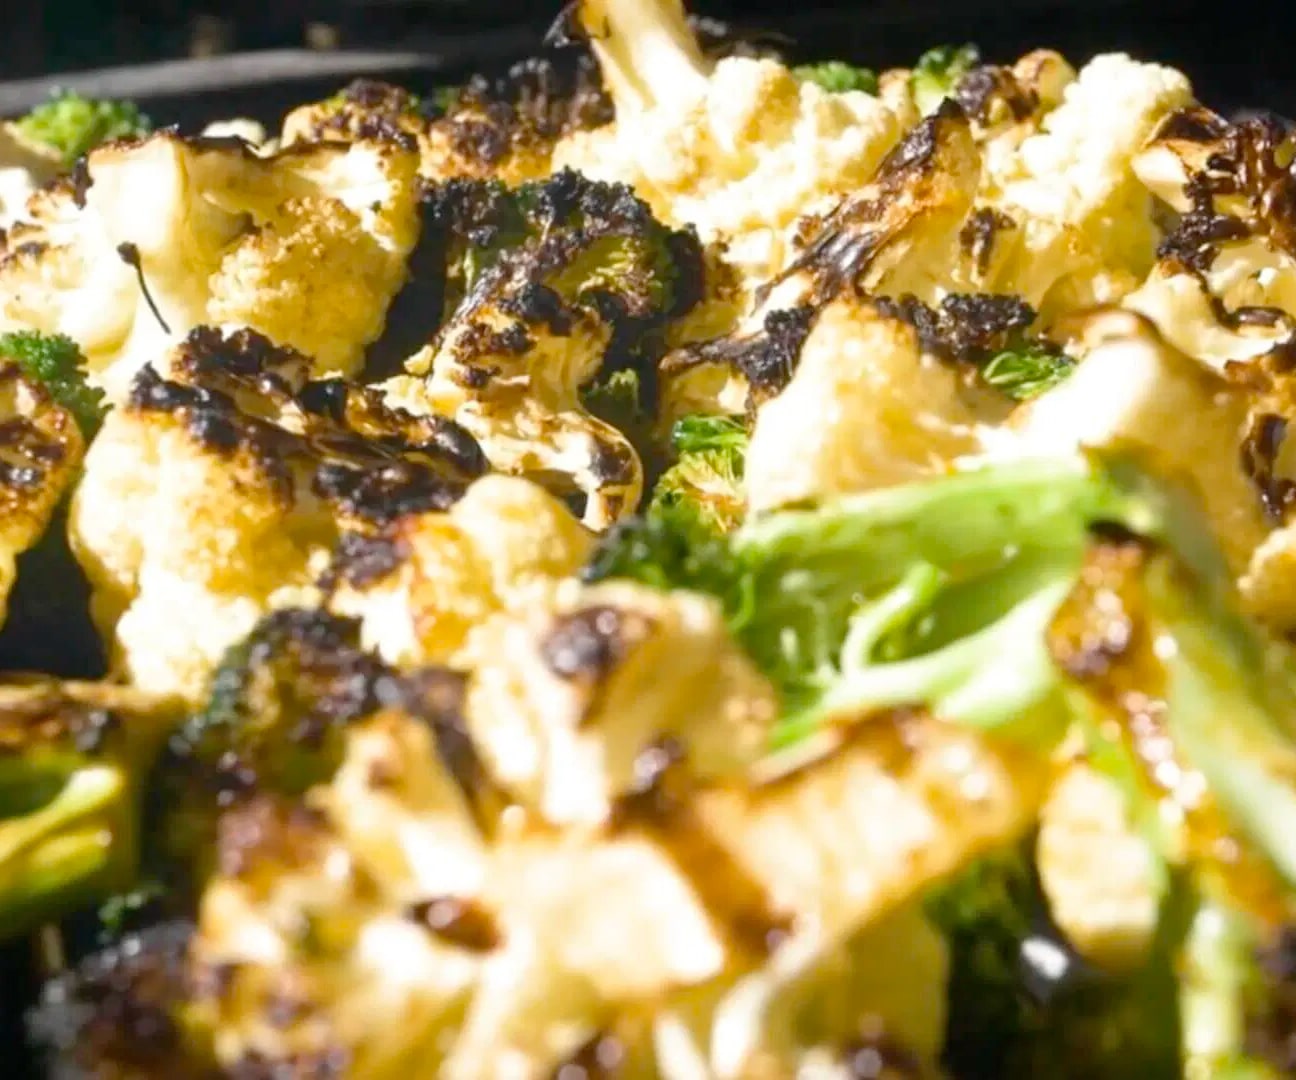 Photo of Grilled Broccoli and Cauliflower with Spicy Peanut Vinaigrette